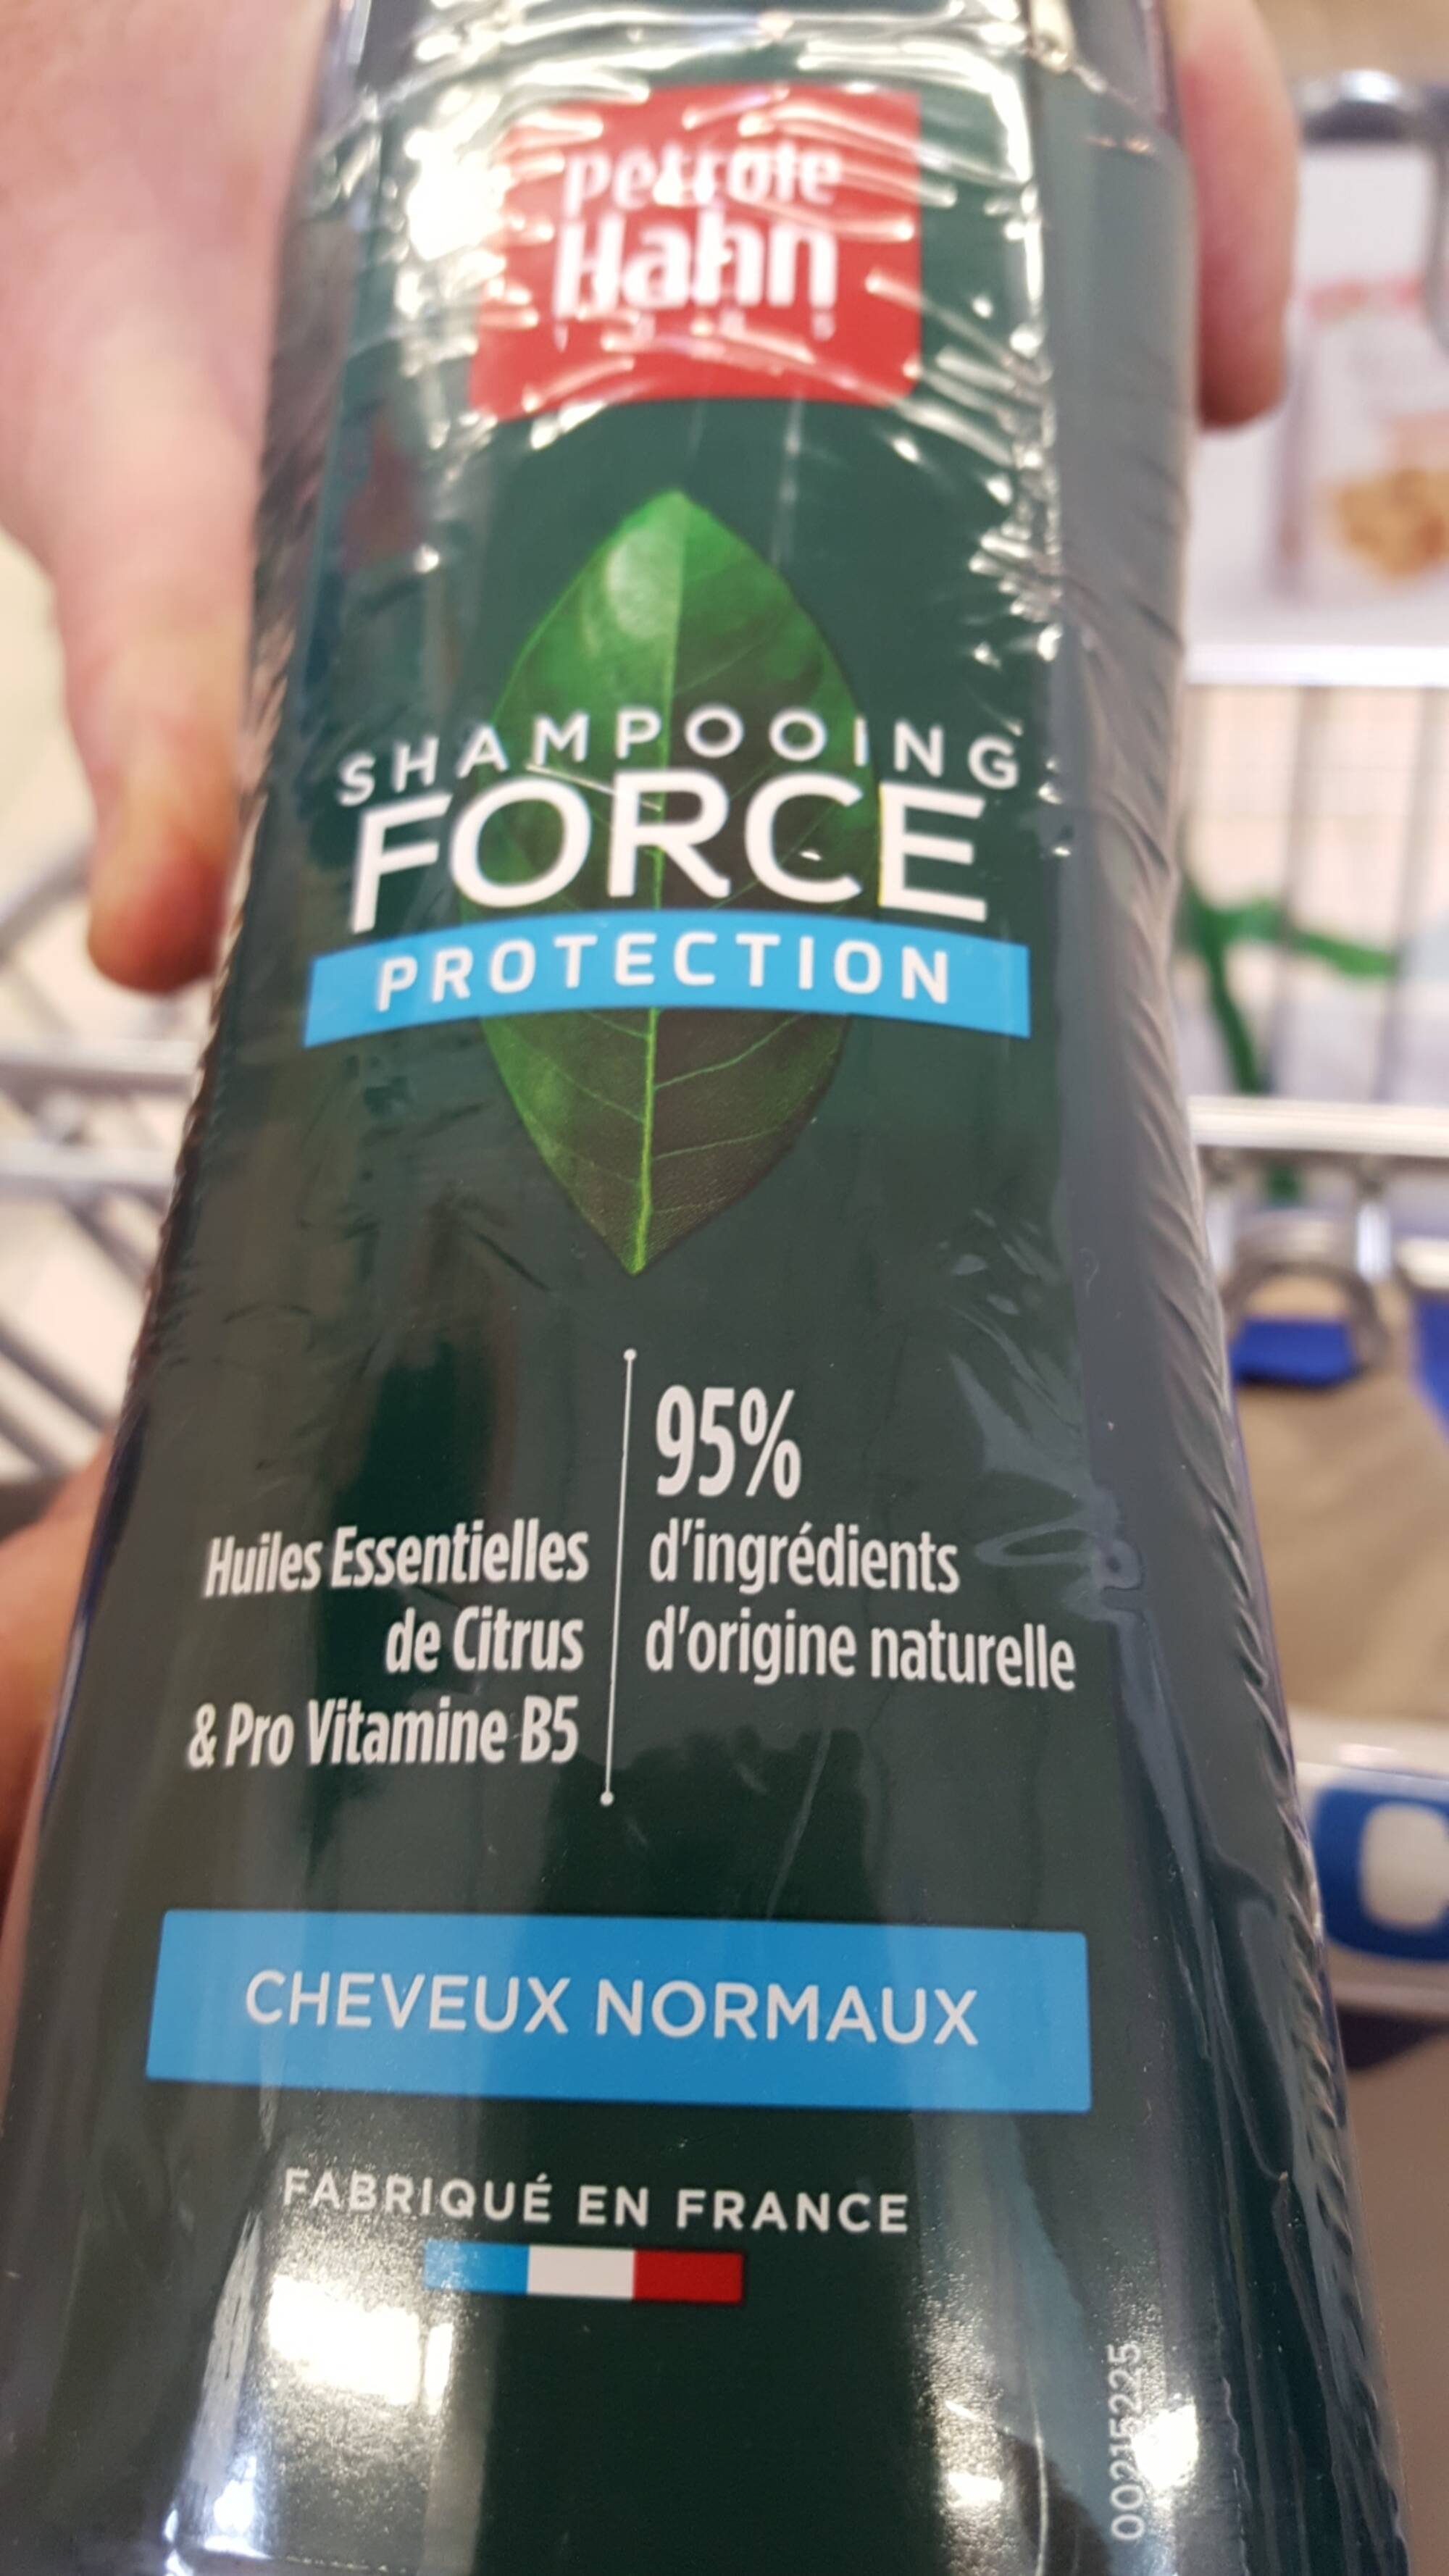 PÉTROLE HAHN - Shampooing force protection